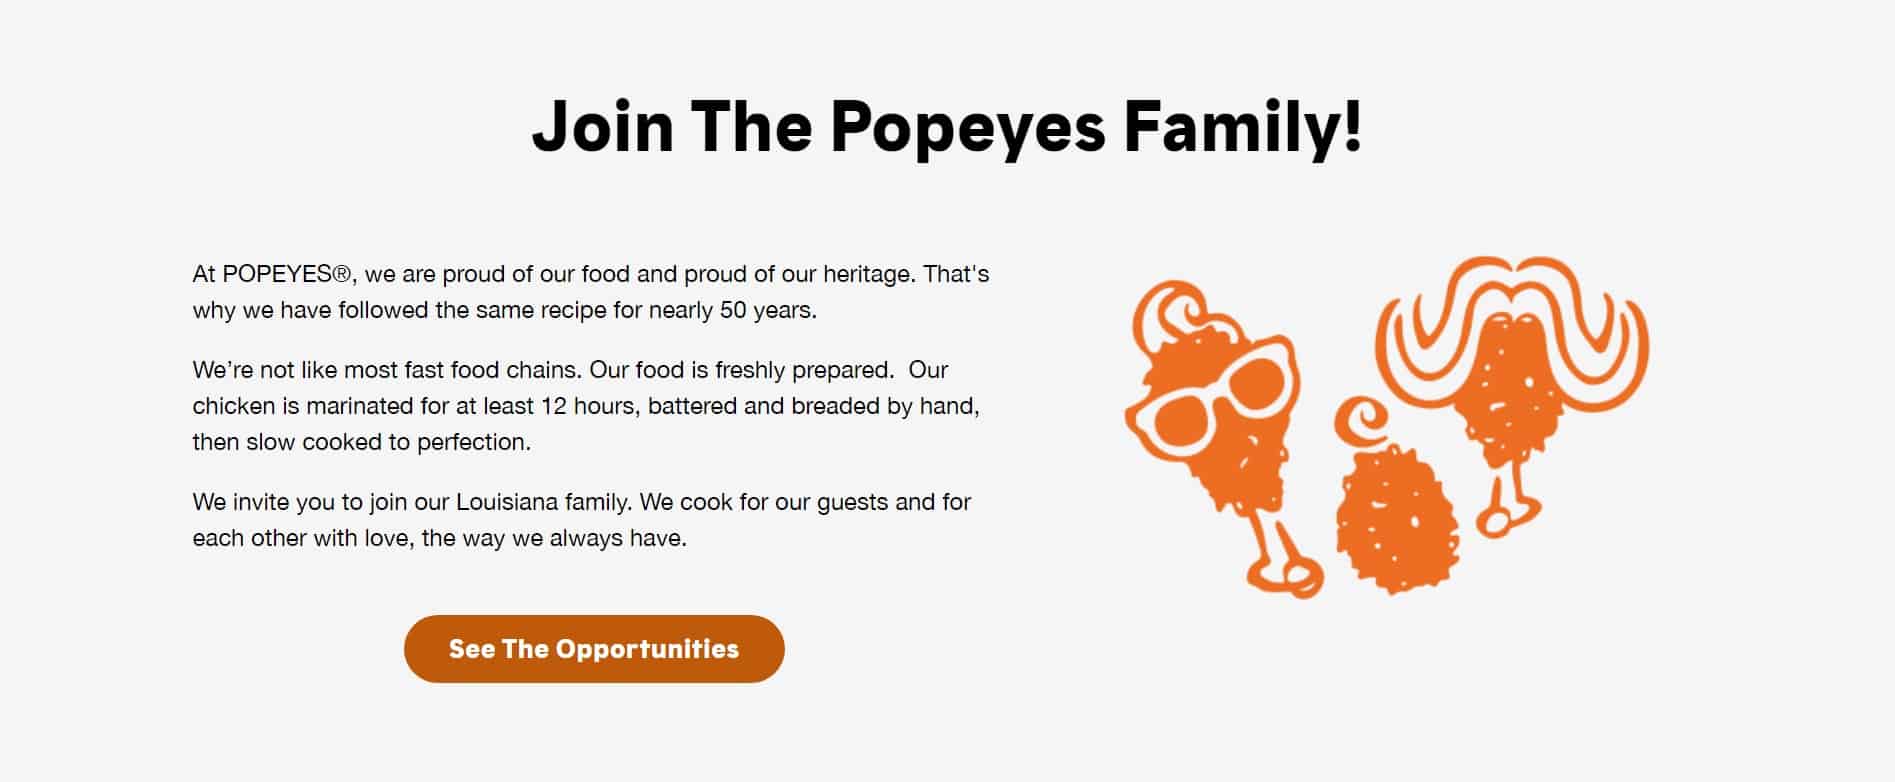 Here's how to apply at Popeyes.